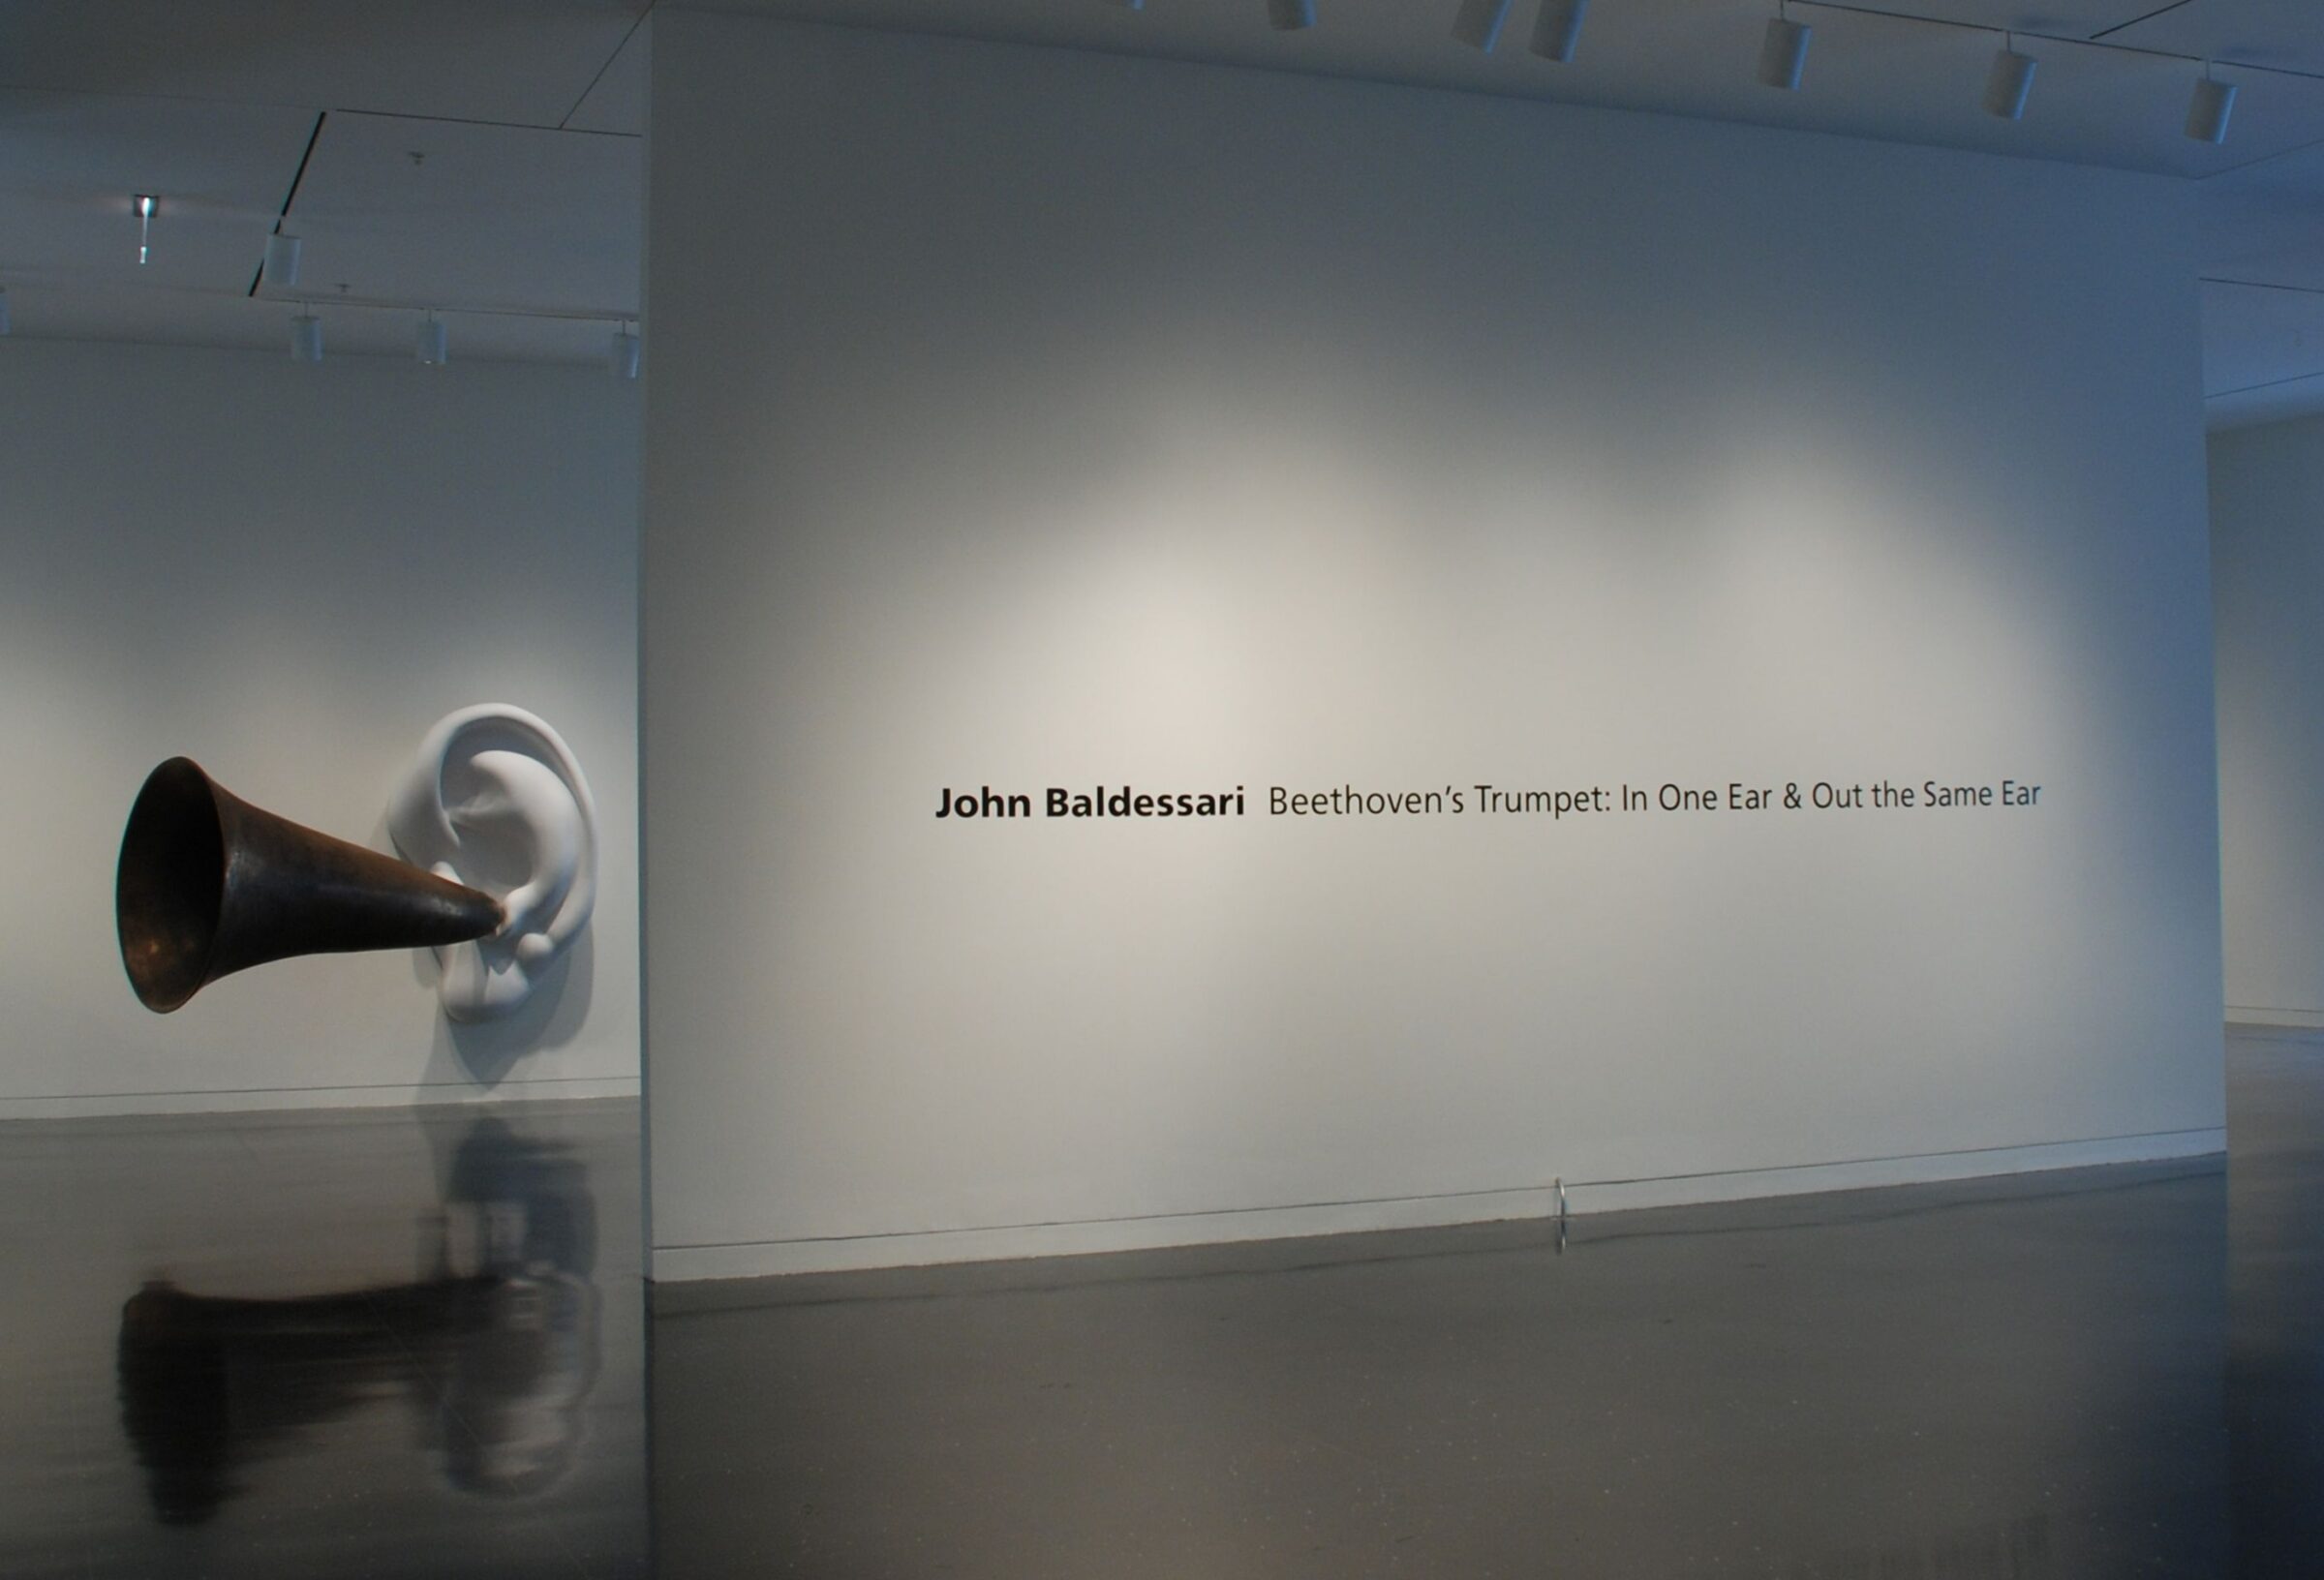 A freestanding gallery wall with black text that reads "John Baldessari: Beethoven's Trumpet: In One Ear & Out the Same Ear" with a sculpture of a massive white ear with a large brass ear horn sticking out of it.